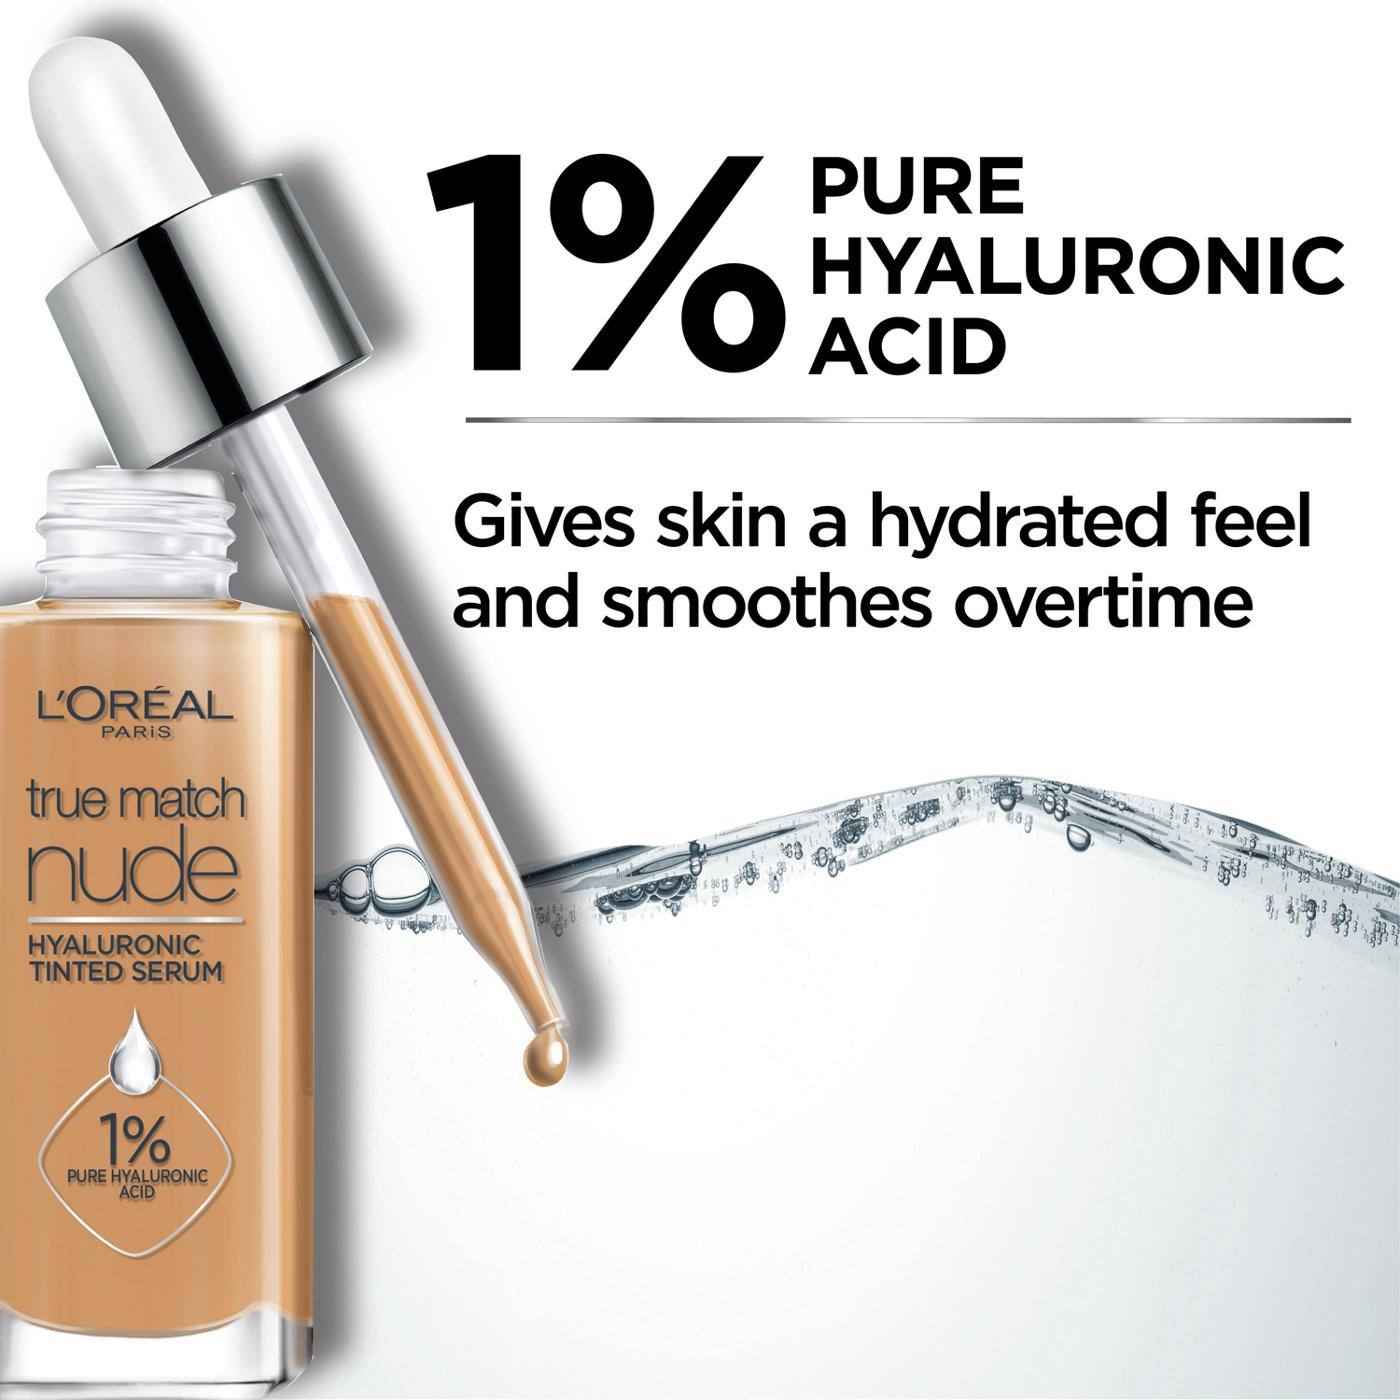 L'Oreal Paris True Match Nude Hyaluronic Tinted Serum Foundation with 1%  Hyaluronic acid, Rich Medium 4.5-5.5, 1 fl. oz.